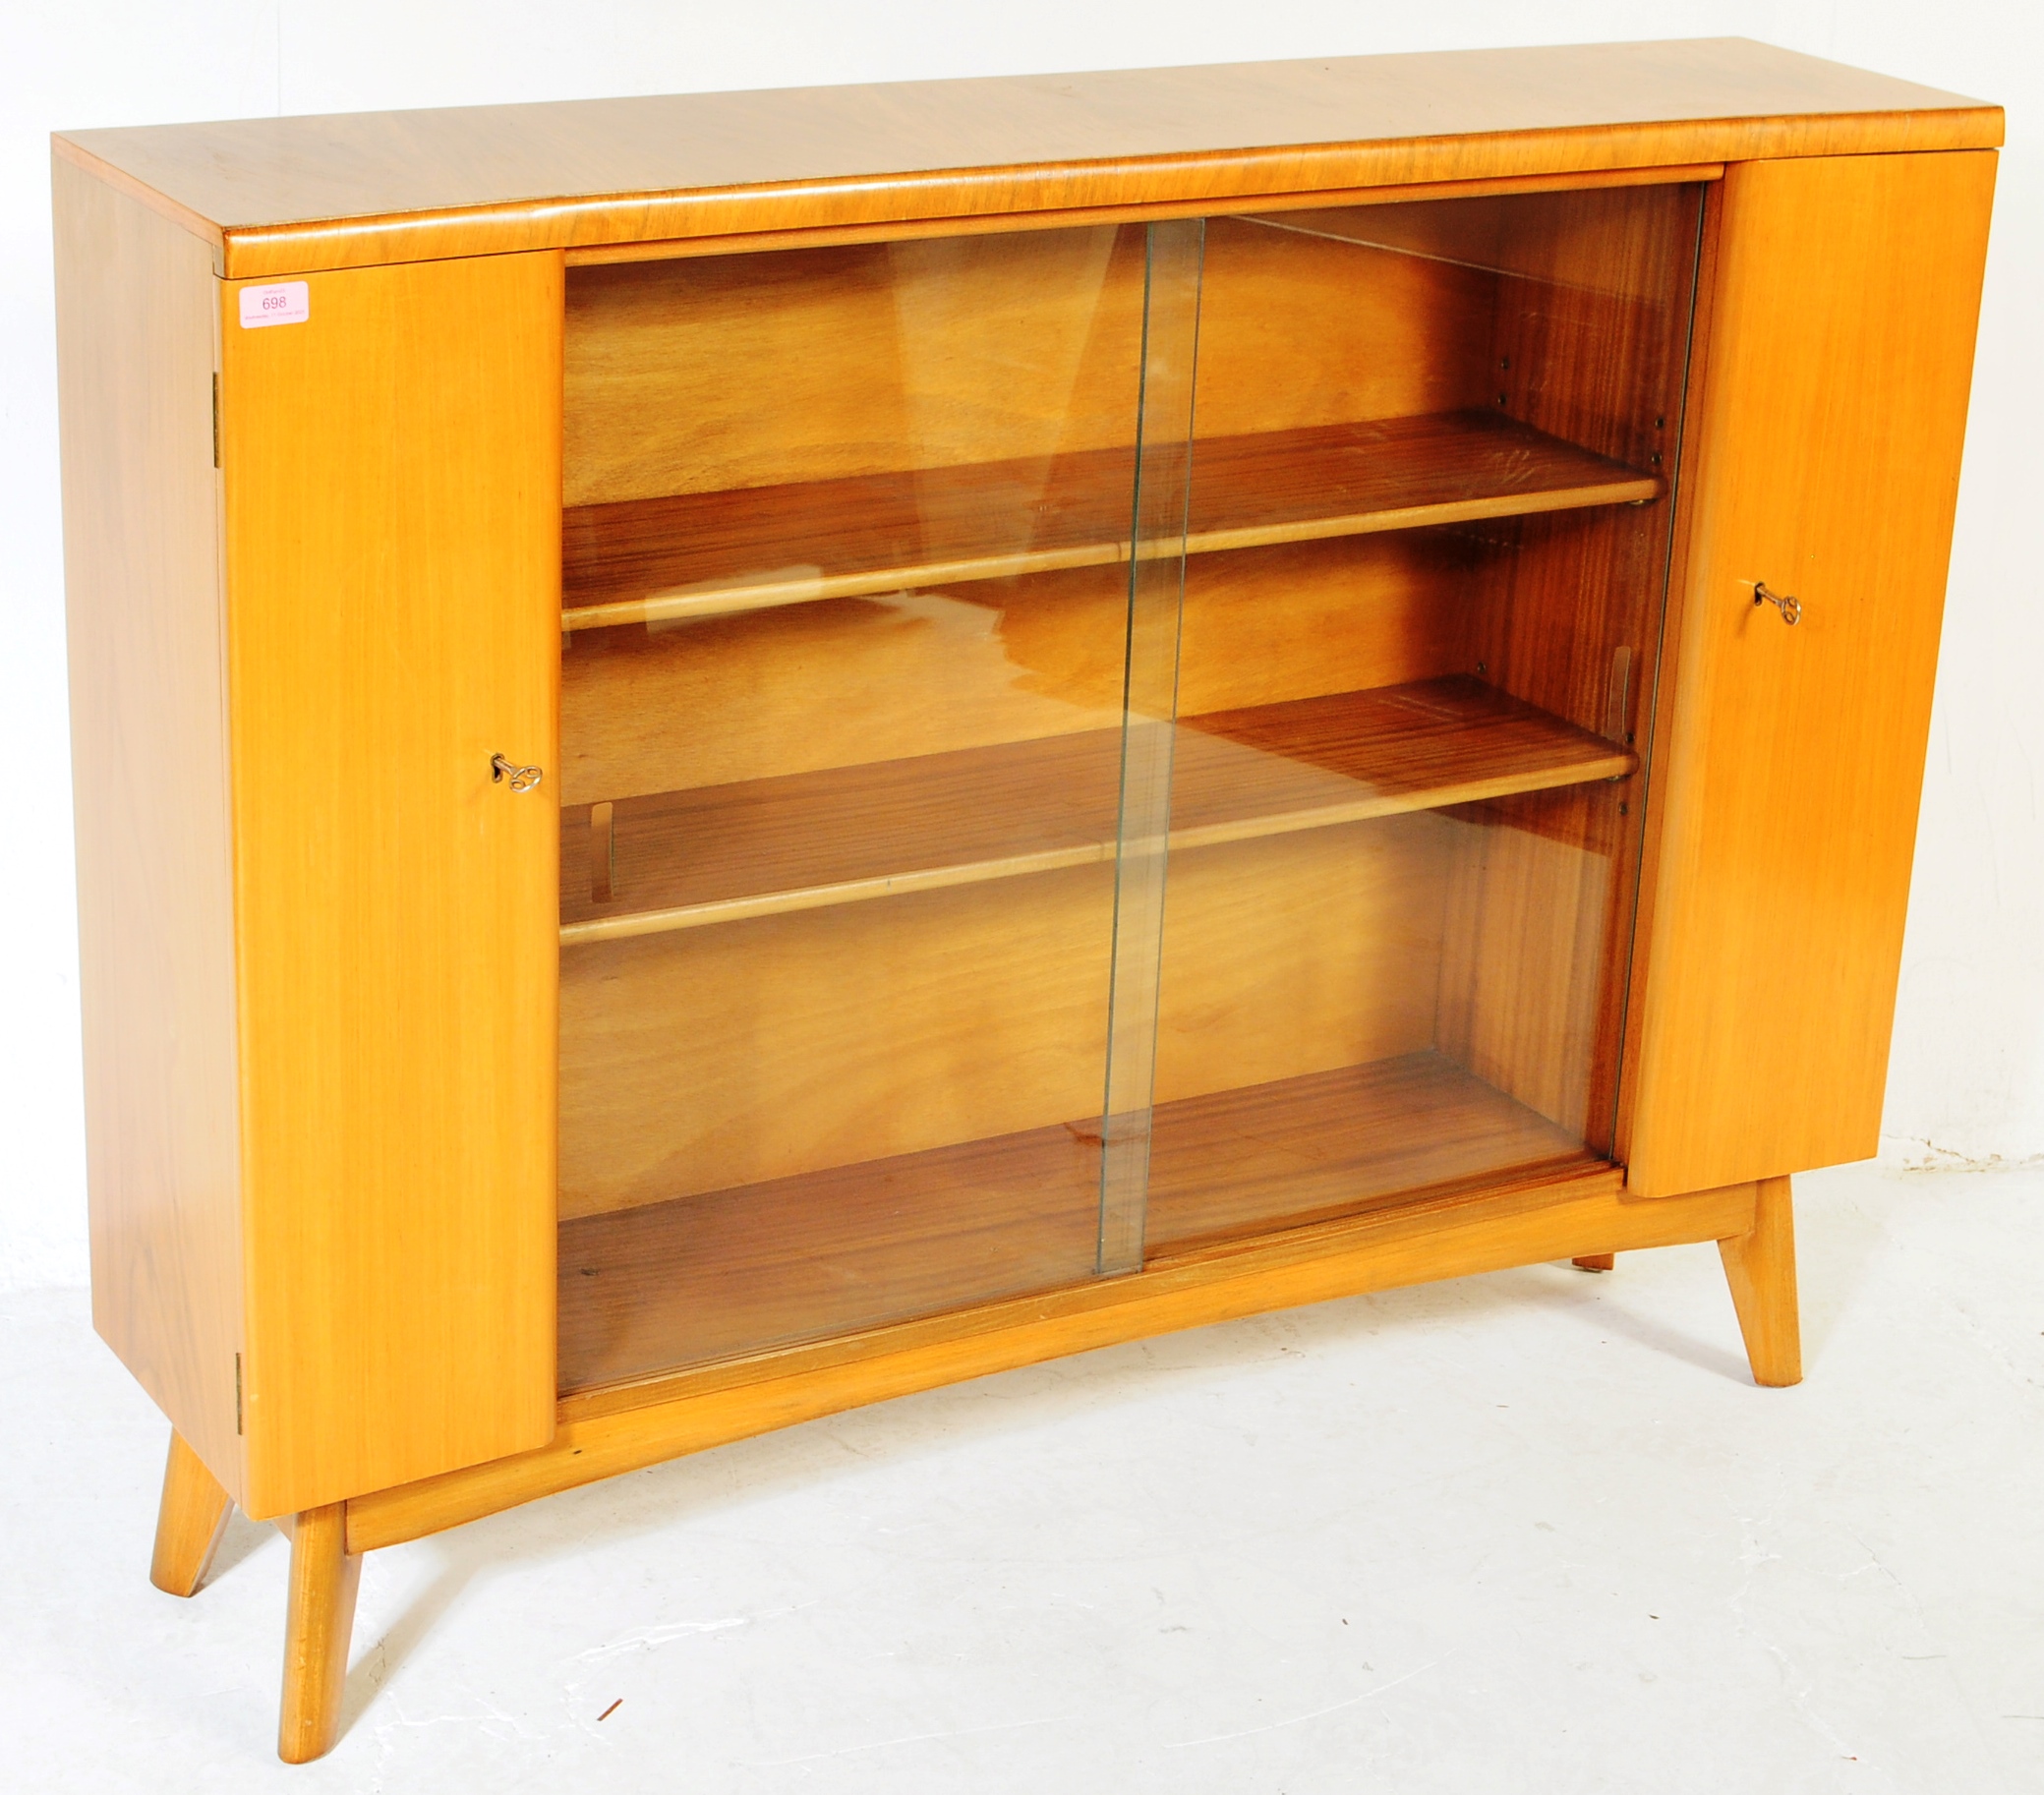 NATHAN FURNITURE - MID CENTURY TEAK WOOD LIBRARY BOOKCASE - Image 2 of 8